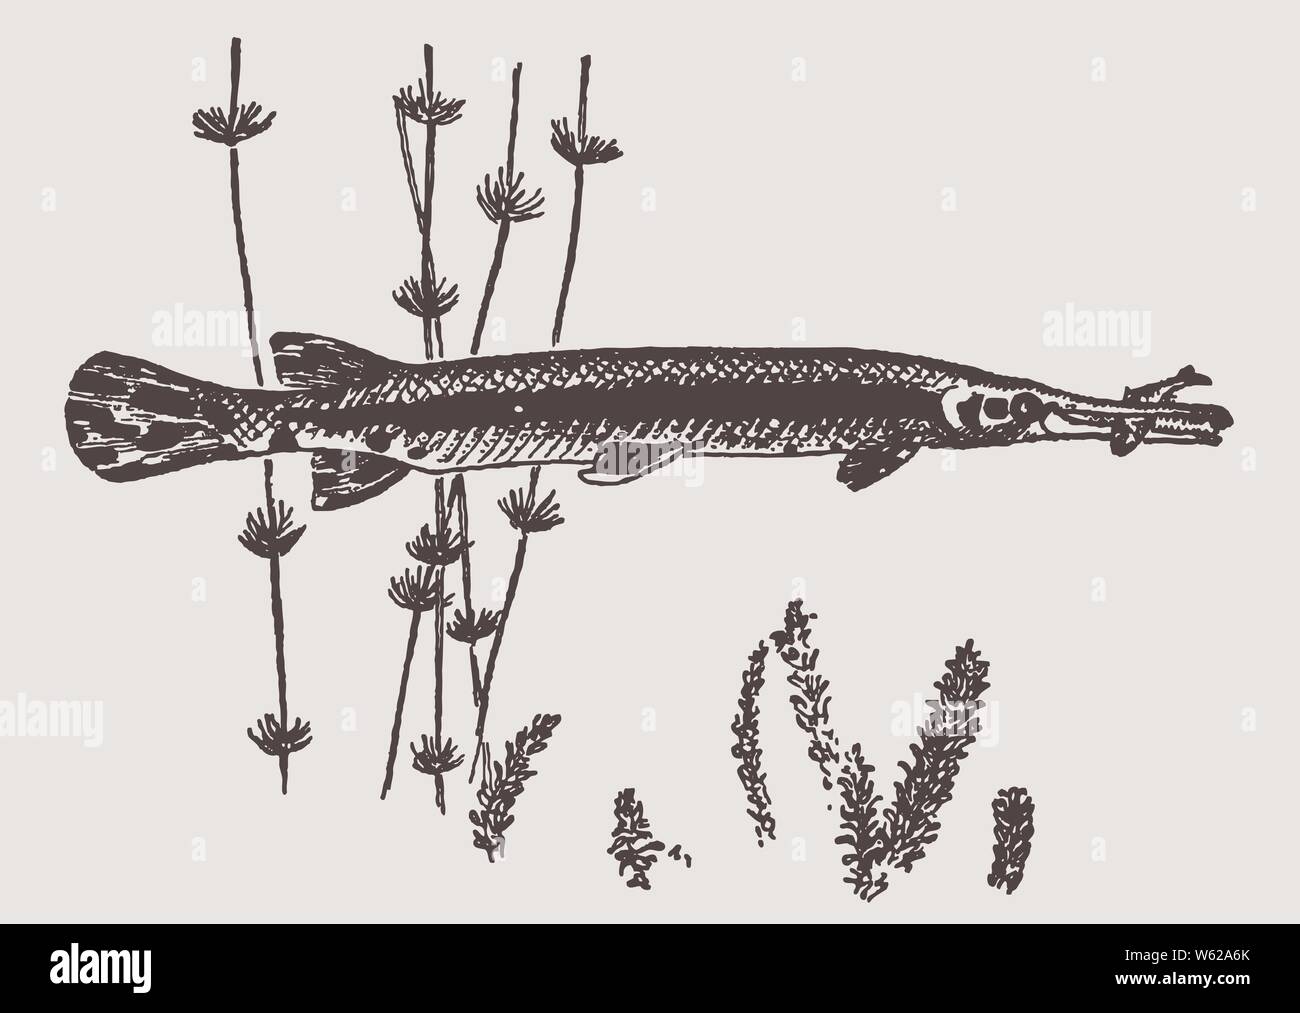 Longnose gar (lepisosteus osseus) has caught a small fish in its jaws. Illustration after a historic engraving from the early 20th century Stock Vector